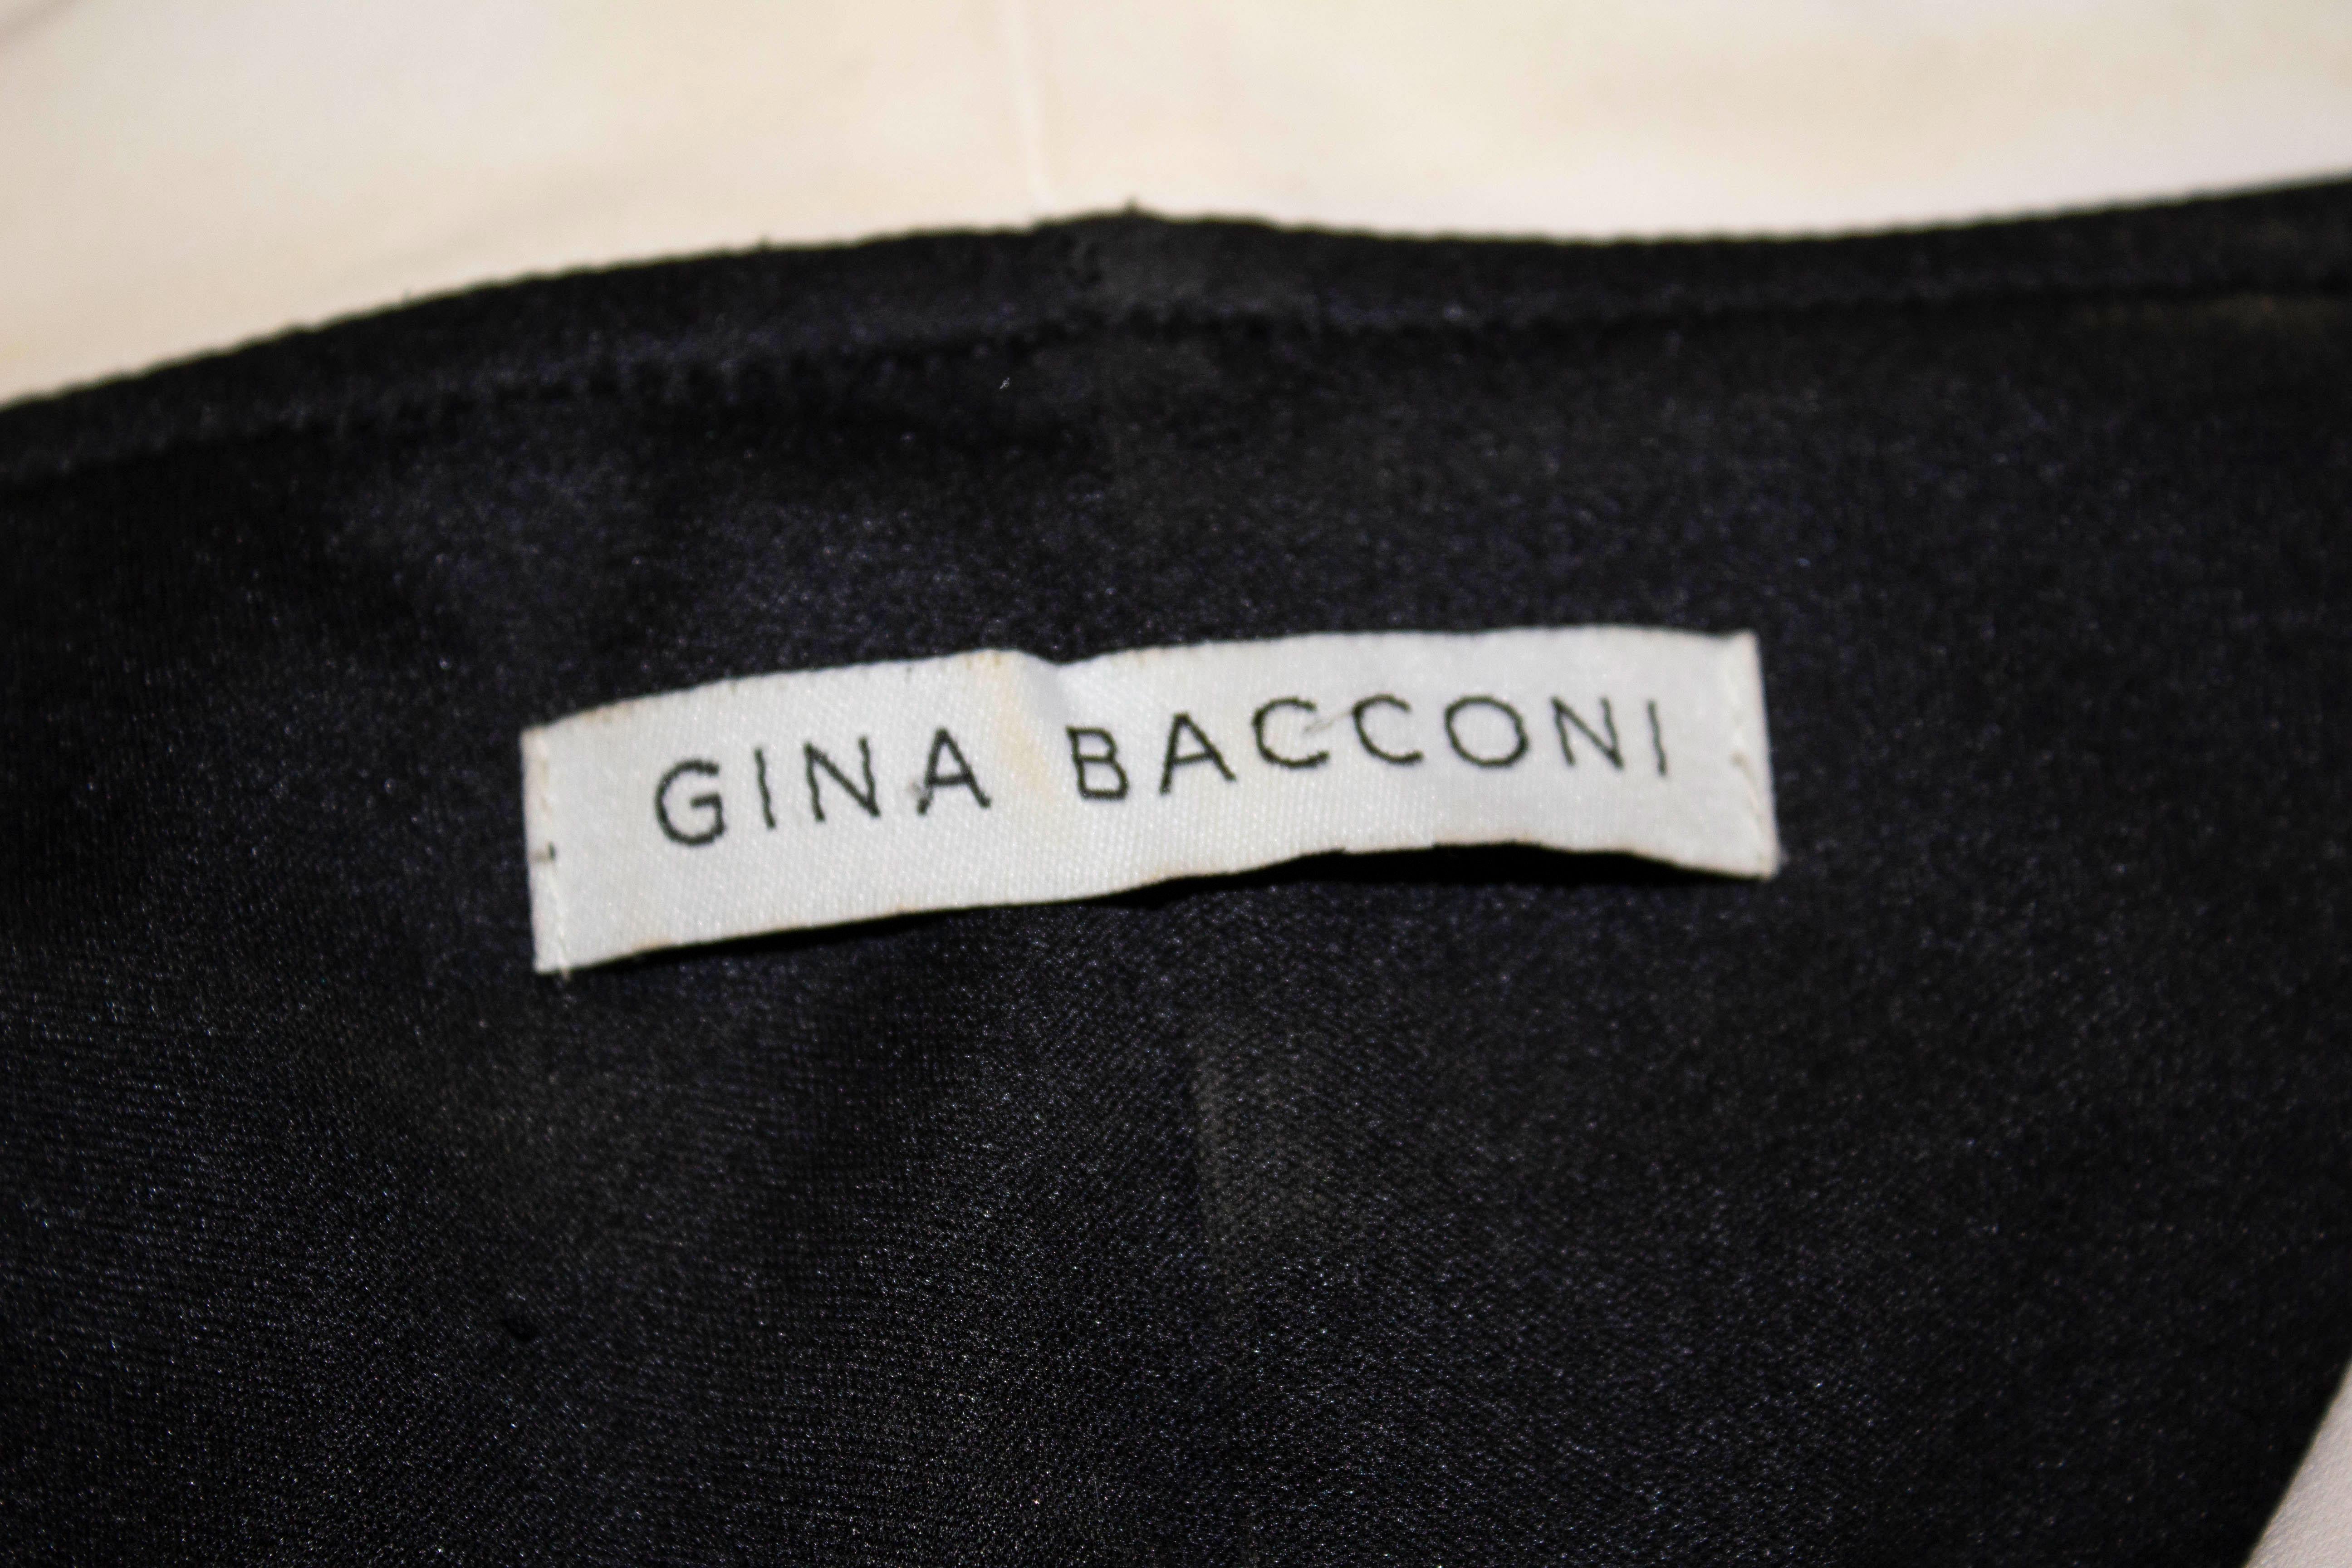  Gina Bacioni Black and White Evening Gown For Sale 2